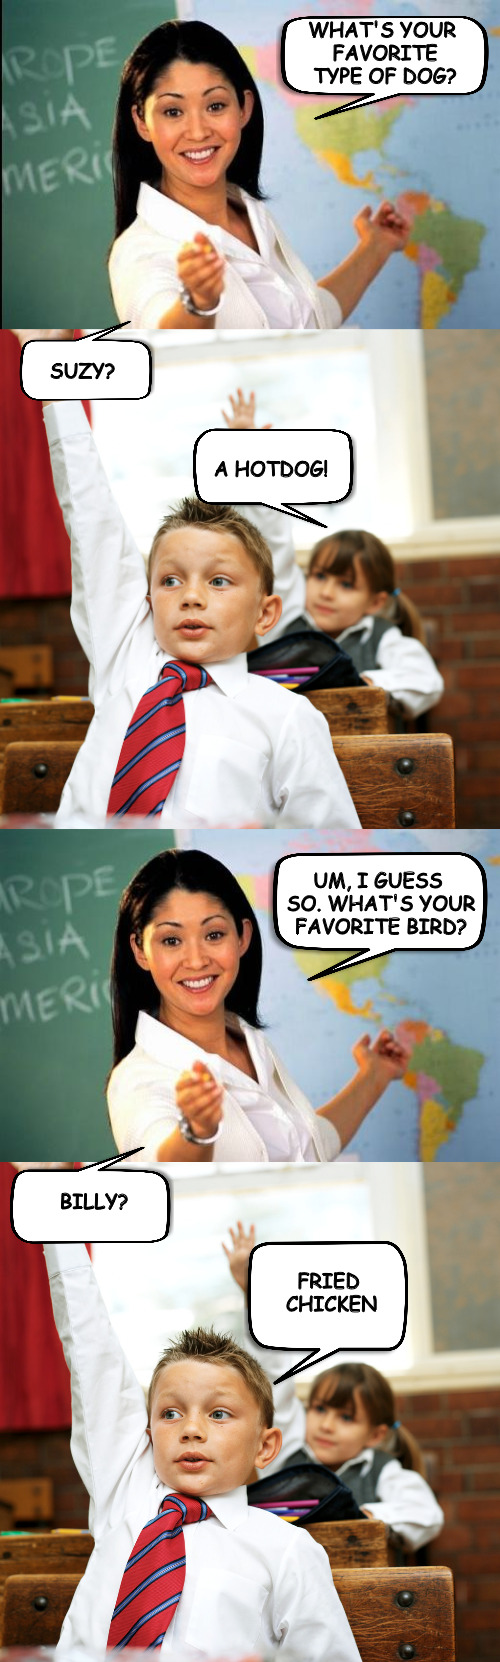 unhelpful teacher gets unhelpful students | WHAT'S YOUR FAVORITE TYPE OF DOG? SUZY? A HOTDOG! UM, I GUESS SO. WHAT'S YOUR FAVORITE BIRD? BILLY? FRIED CHICKEN | image tagged in unhelpful teacher,unhelpful students,school days | made w/ Imgflip meme maker